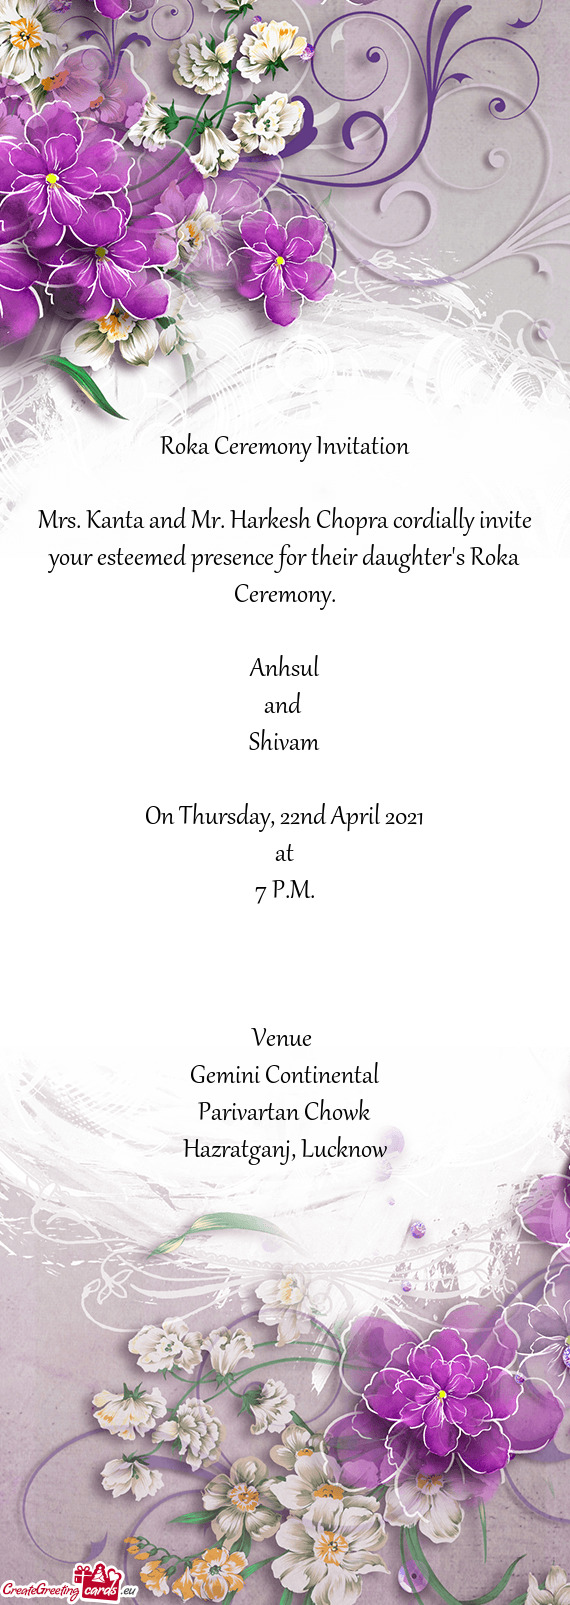 Mrs. Kanta and Mr. Harkesh Chopra cordially invite your esteemed presence for their daughter